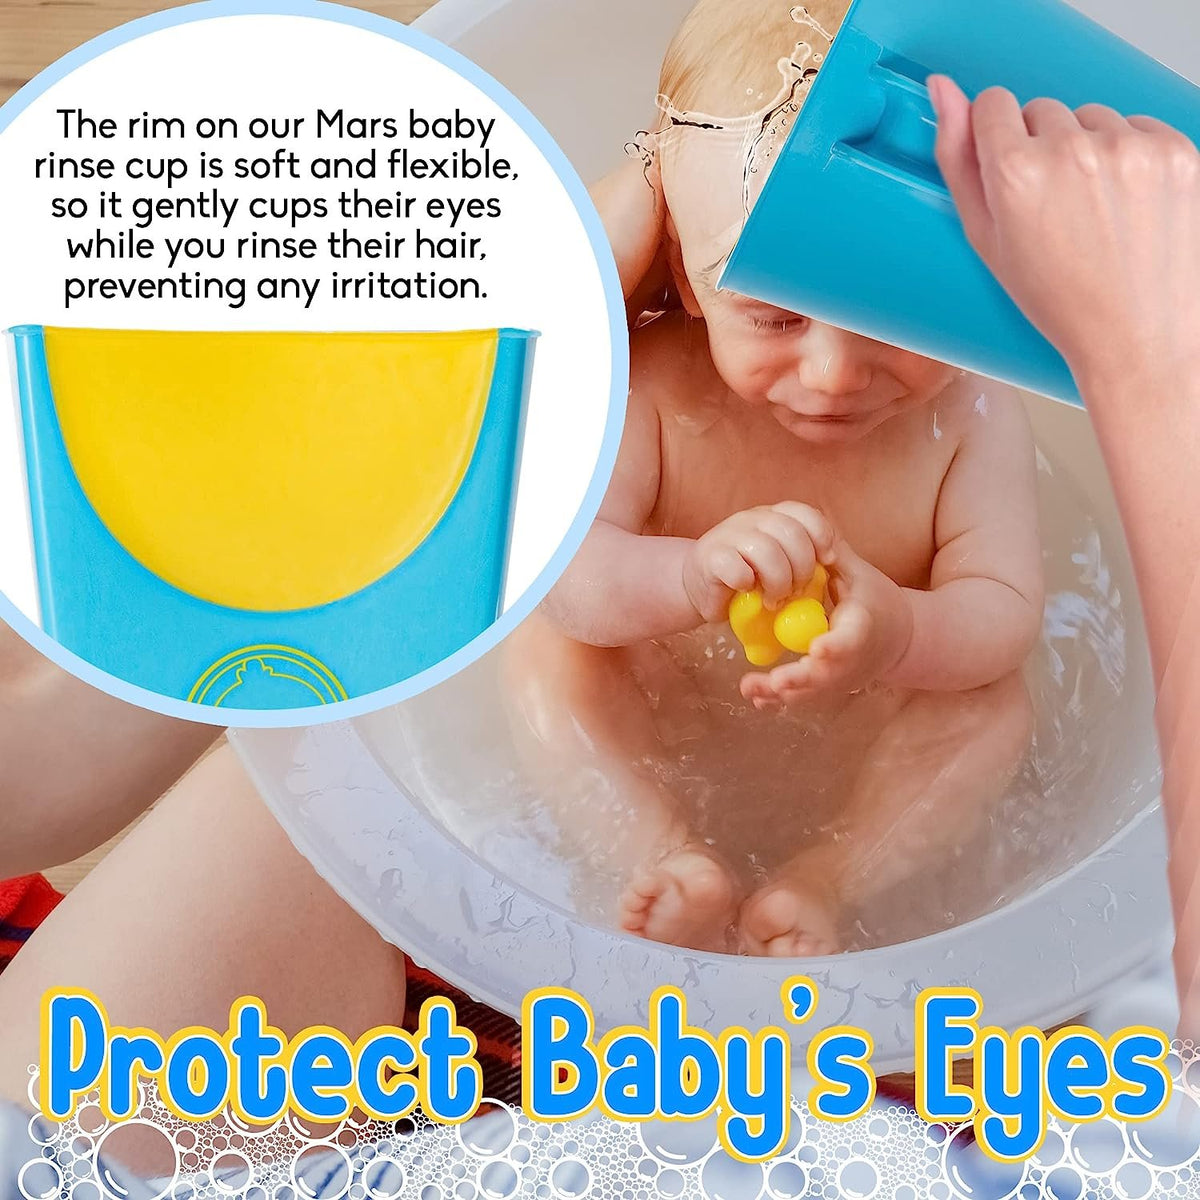 MARS BABY Shampoo Bathing Cup - Bath Spout for Head and Body Washing - Rinse Newborns and Infants Heads and Protect Eyes - No More Tears